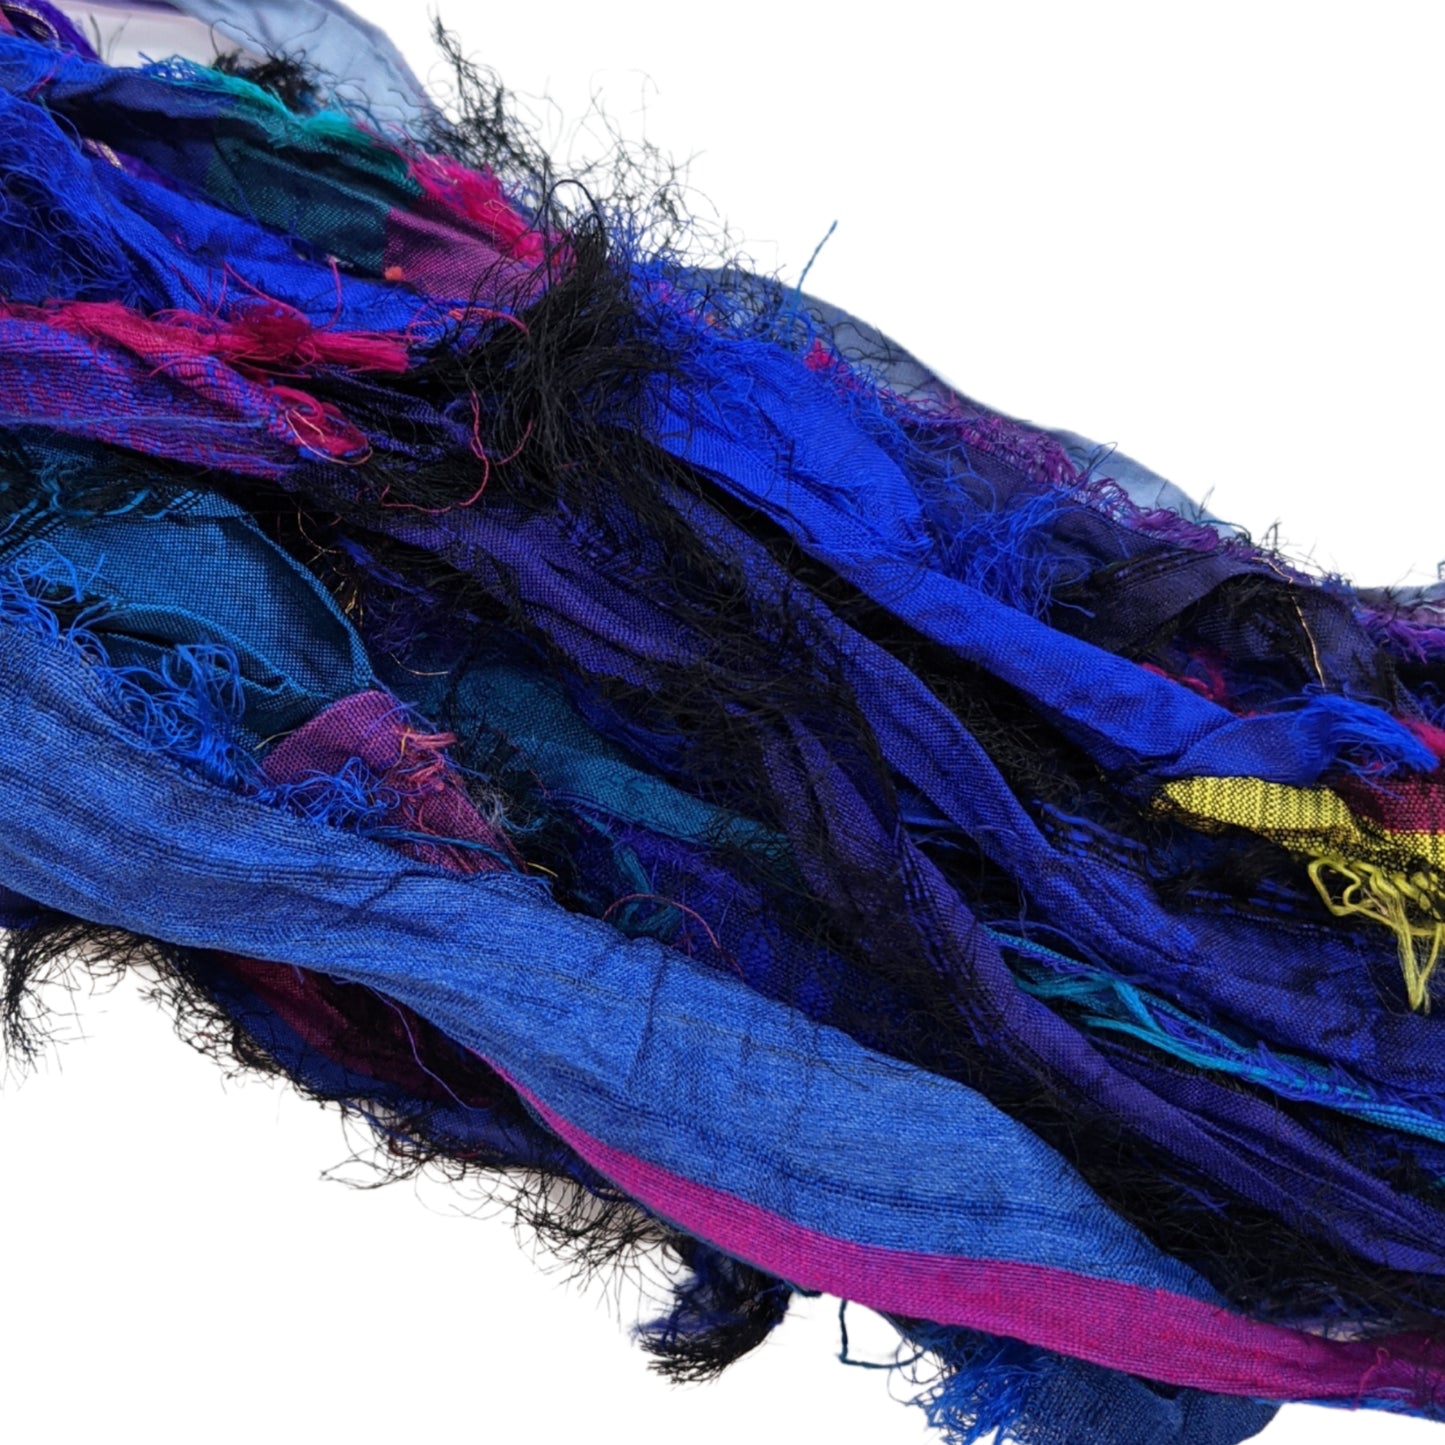 An up closer view of the Indigo sari silk ribbon on a white background. The Indigo includes rich plum purples and blues to blacks and pinks with hints of gold.